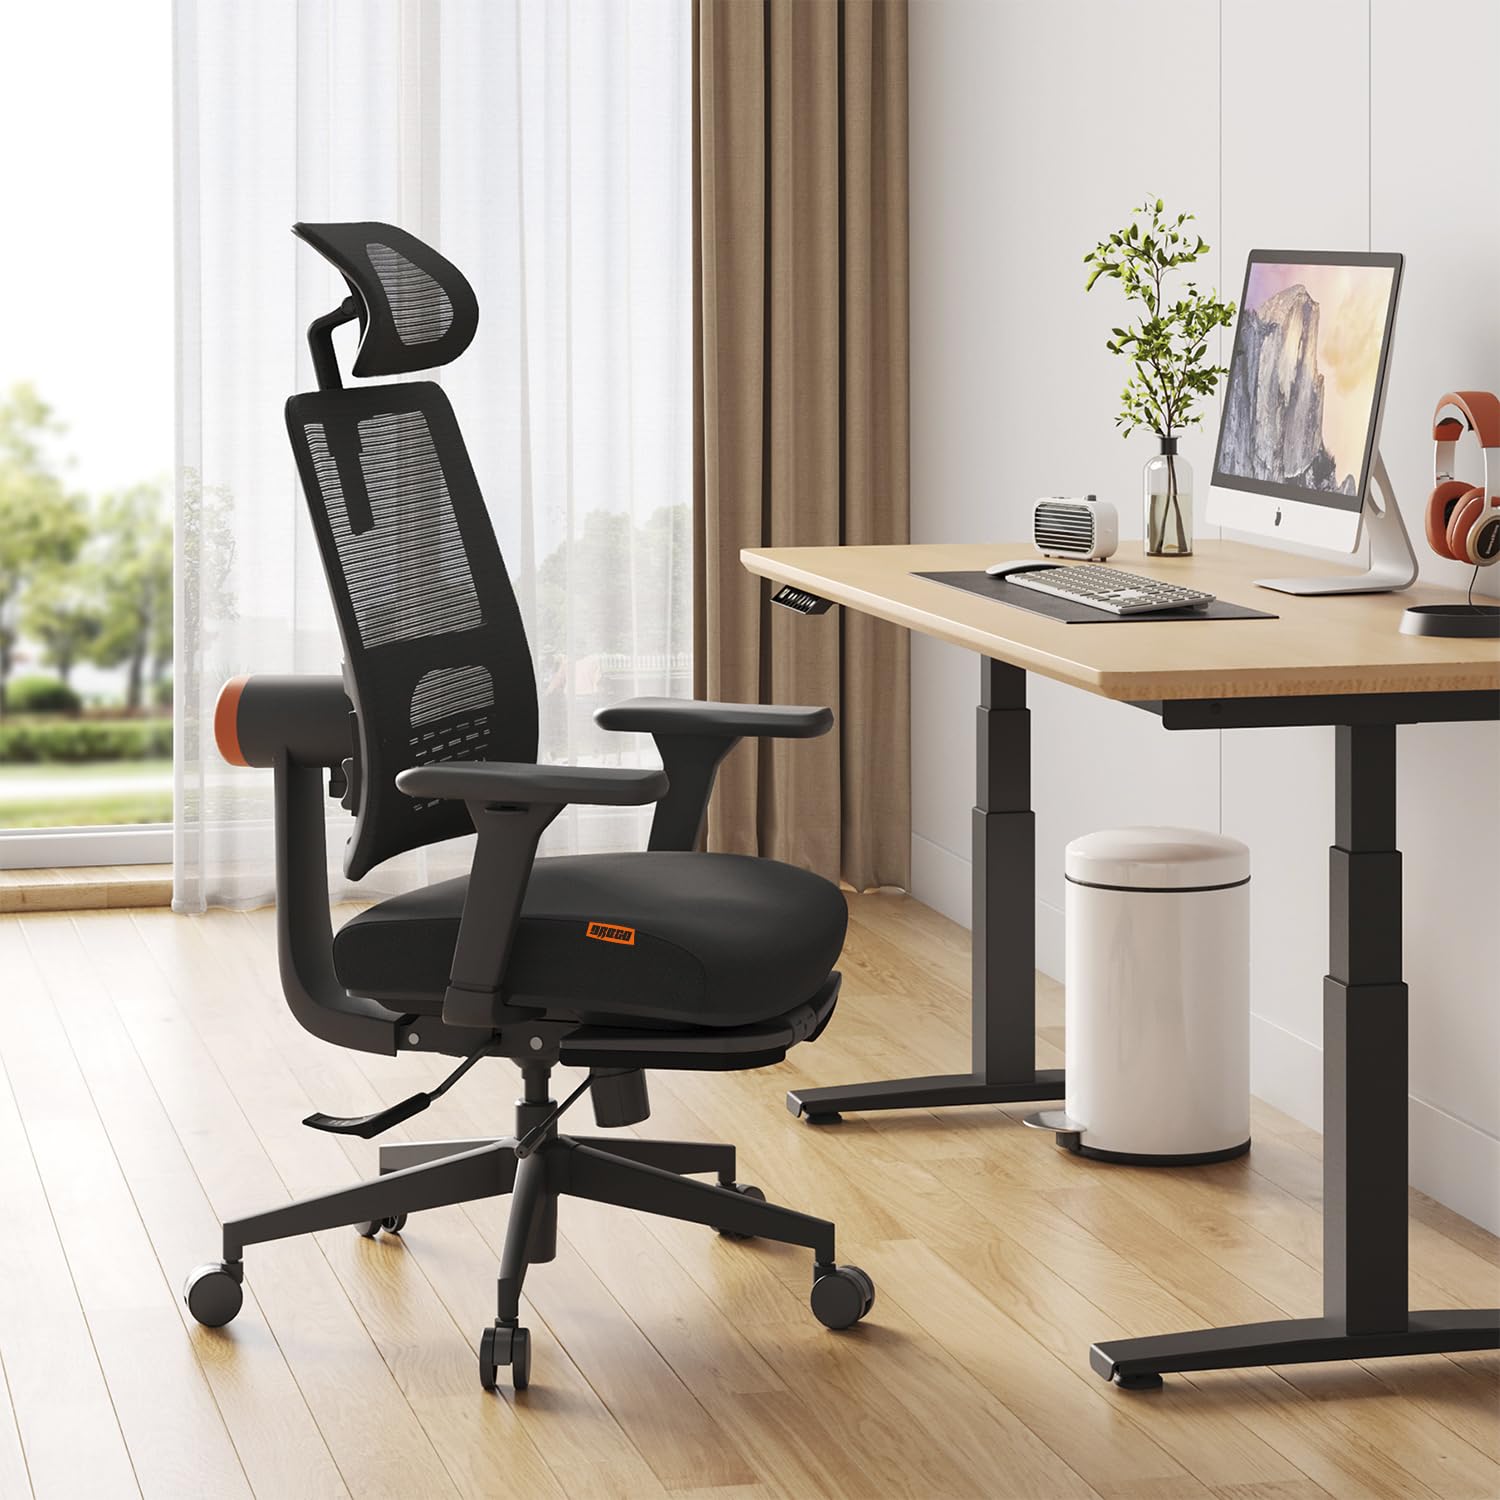 DROGO Bold PosturePro Ergonomic Office Chair for Work from Home, High Back Computer Chair with Adaptive Lumbar Support